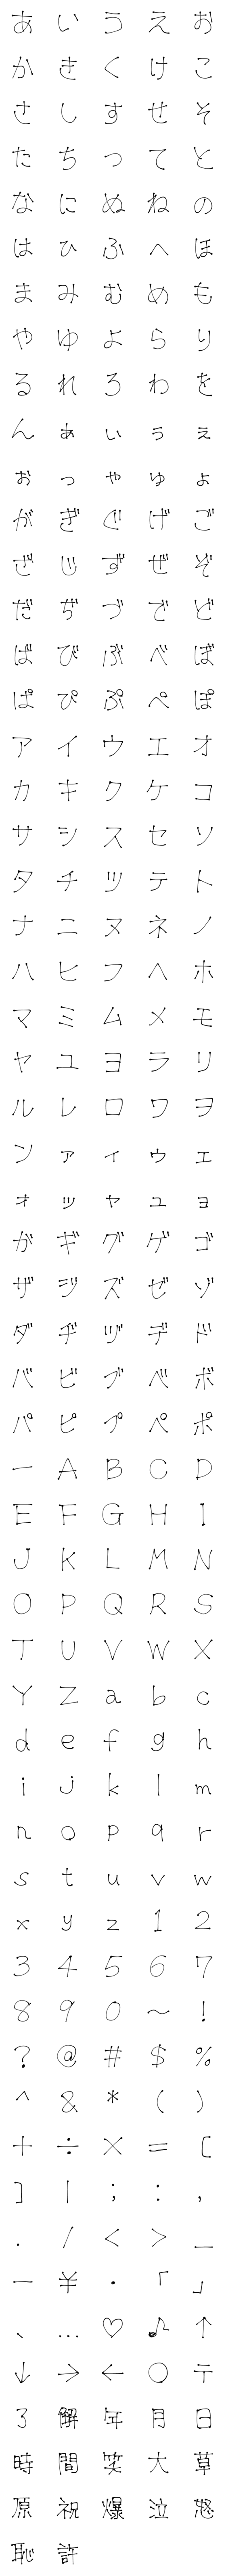 [LINE絵文字]手書きインク文字/フォント絵文字の画像一覧